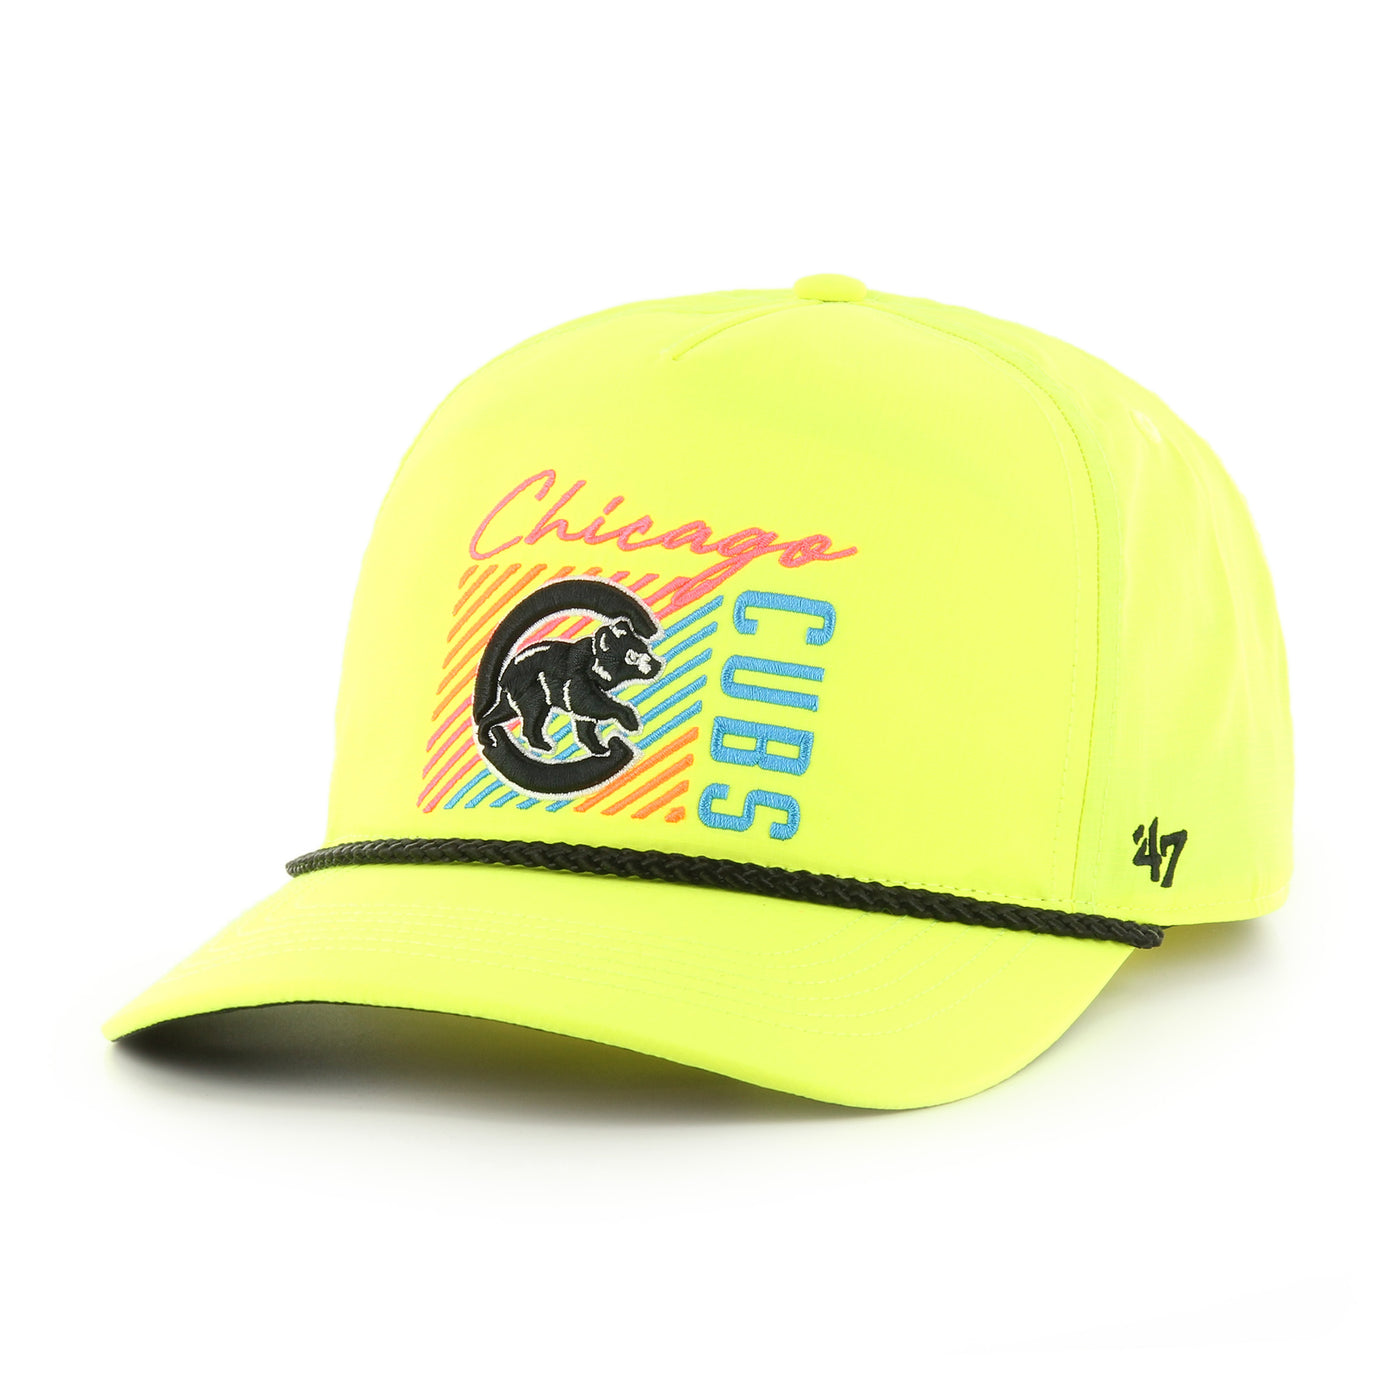 CHICAGO CUBS '47 HITCH WALKING BEAR NEON YELLOW SNAPBACK ROPE CAP